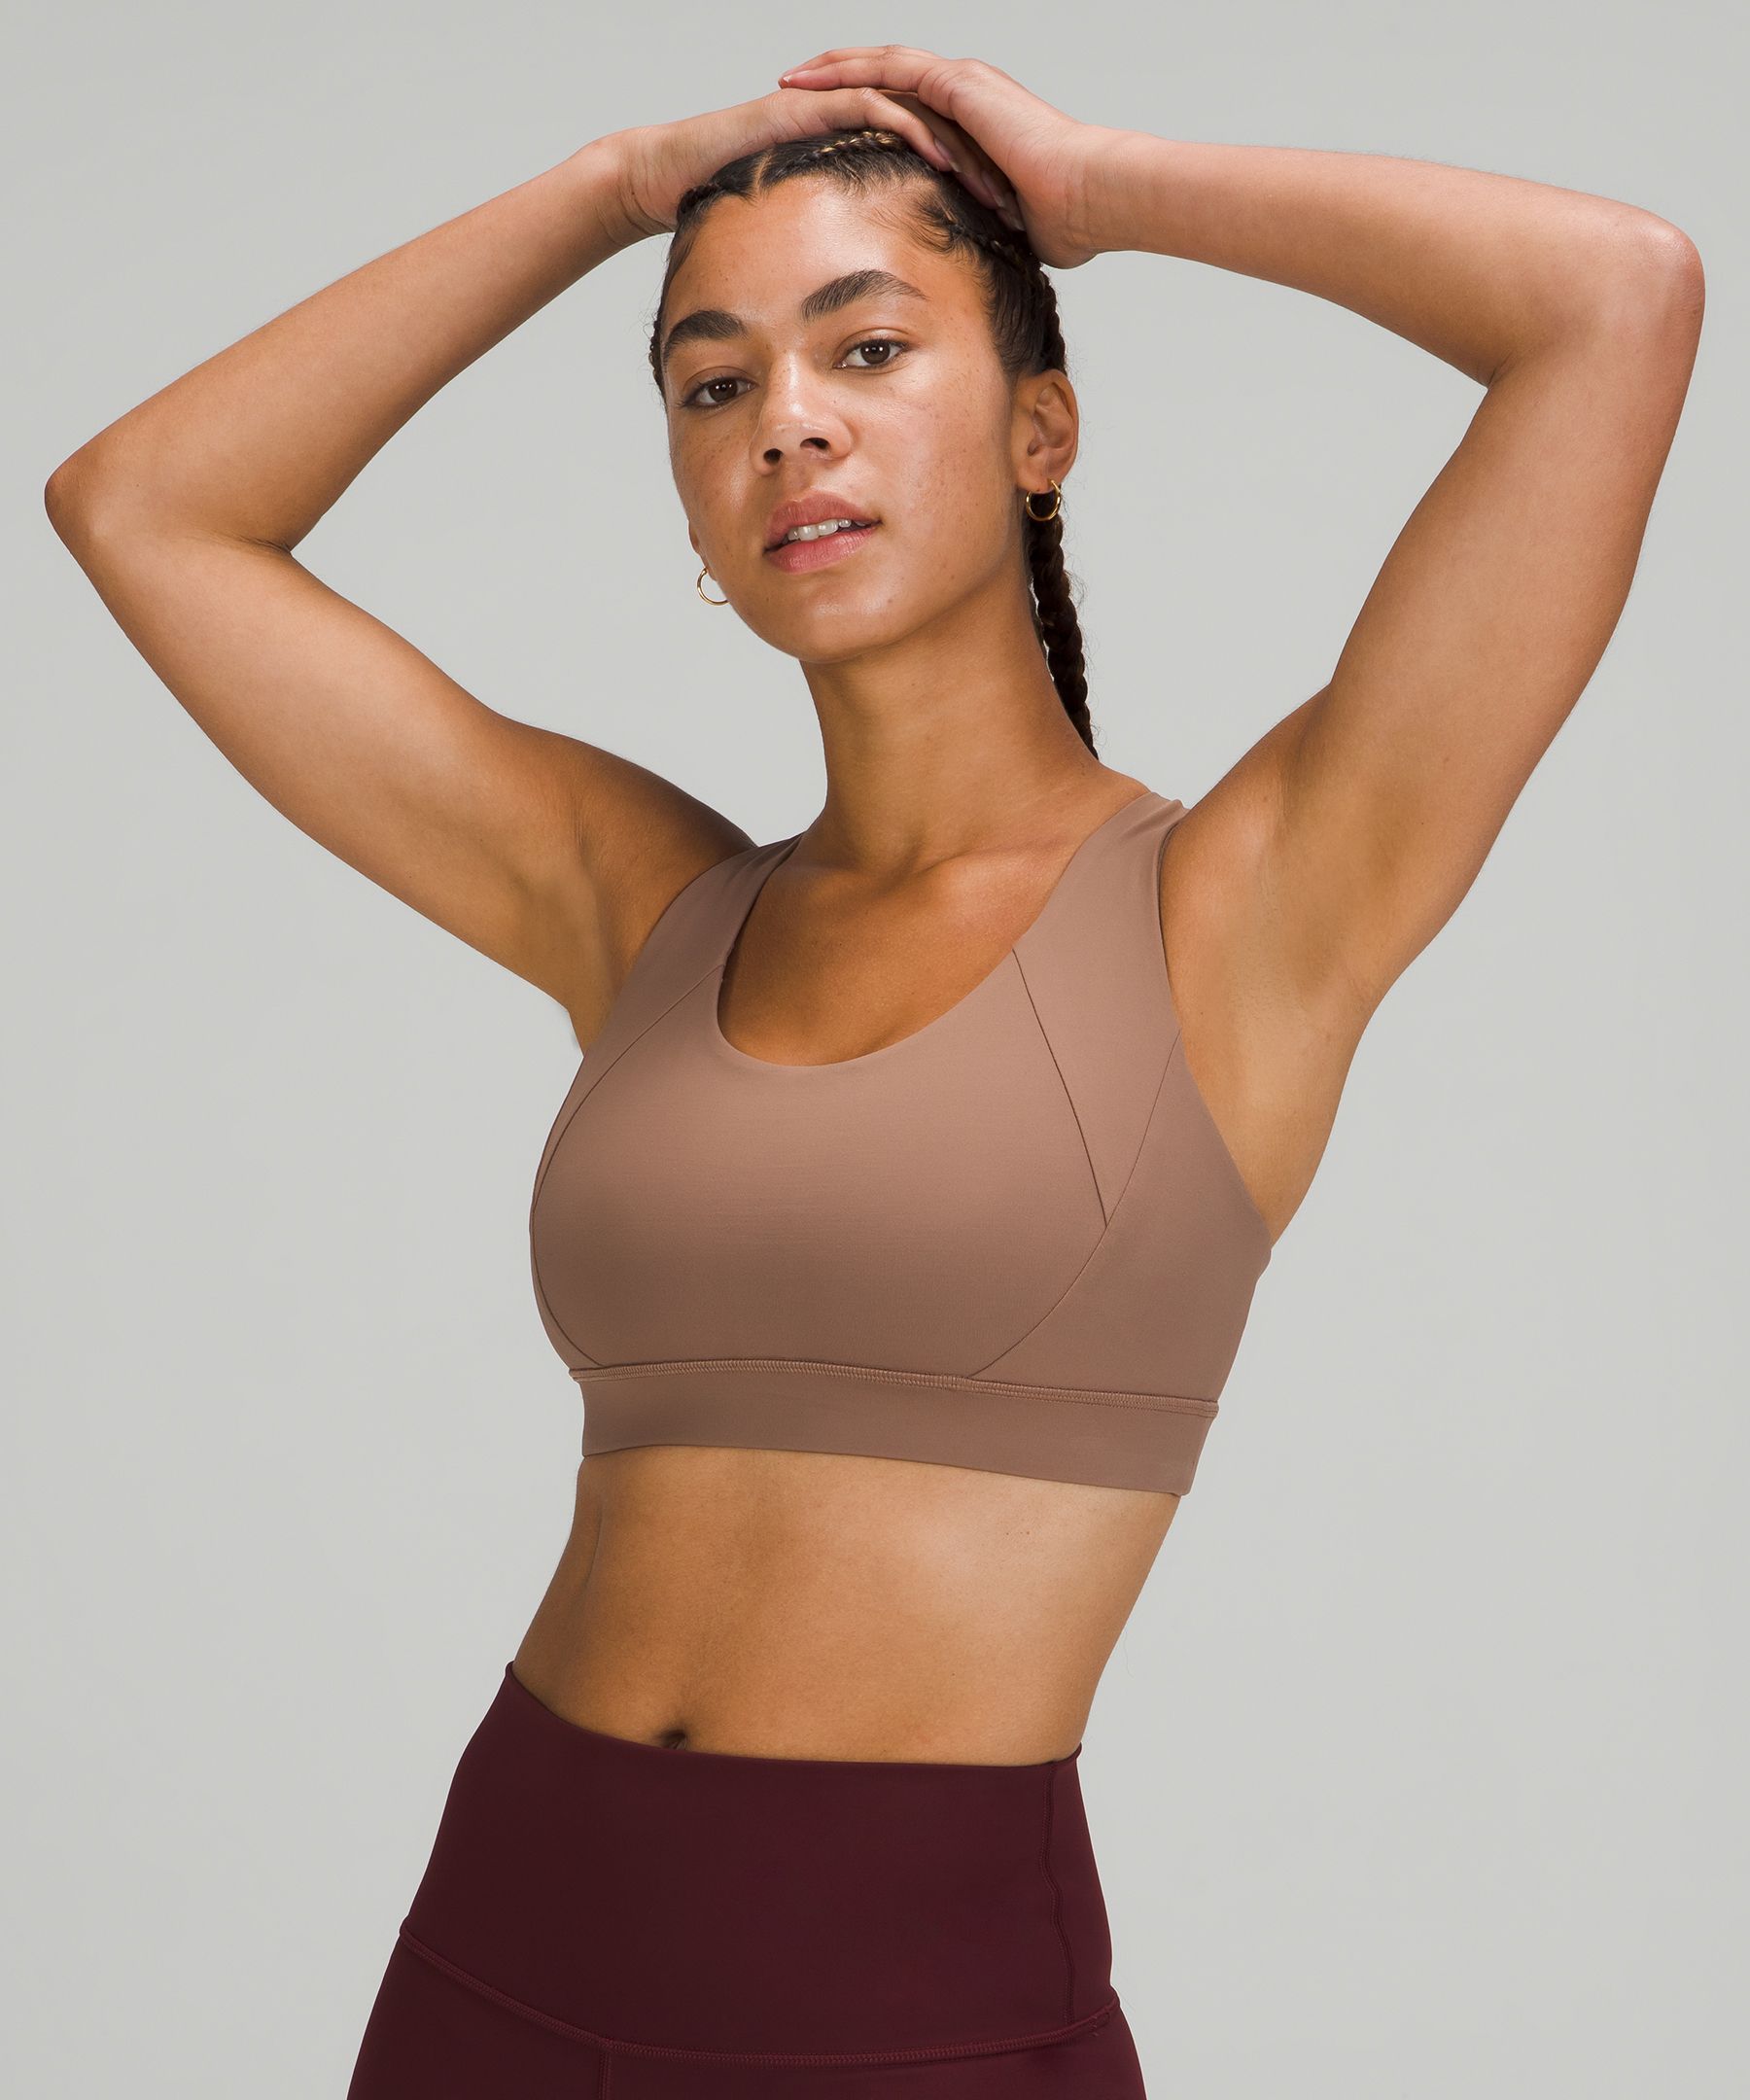 Free to Be Elevated Bra *Light Support, DD/DDD(E) Cup